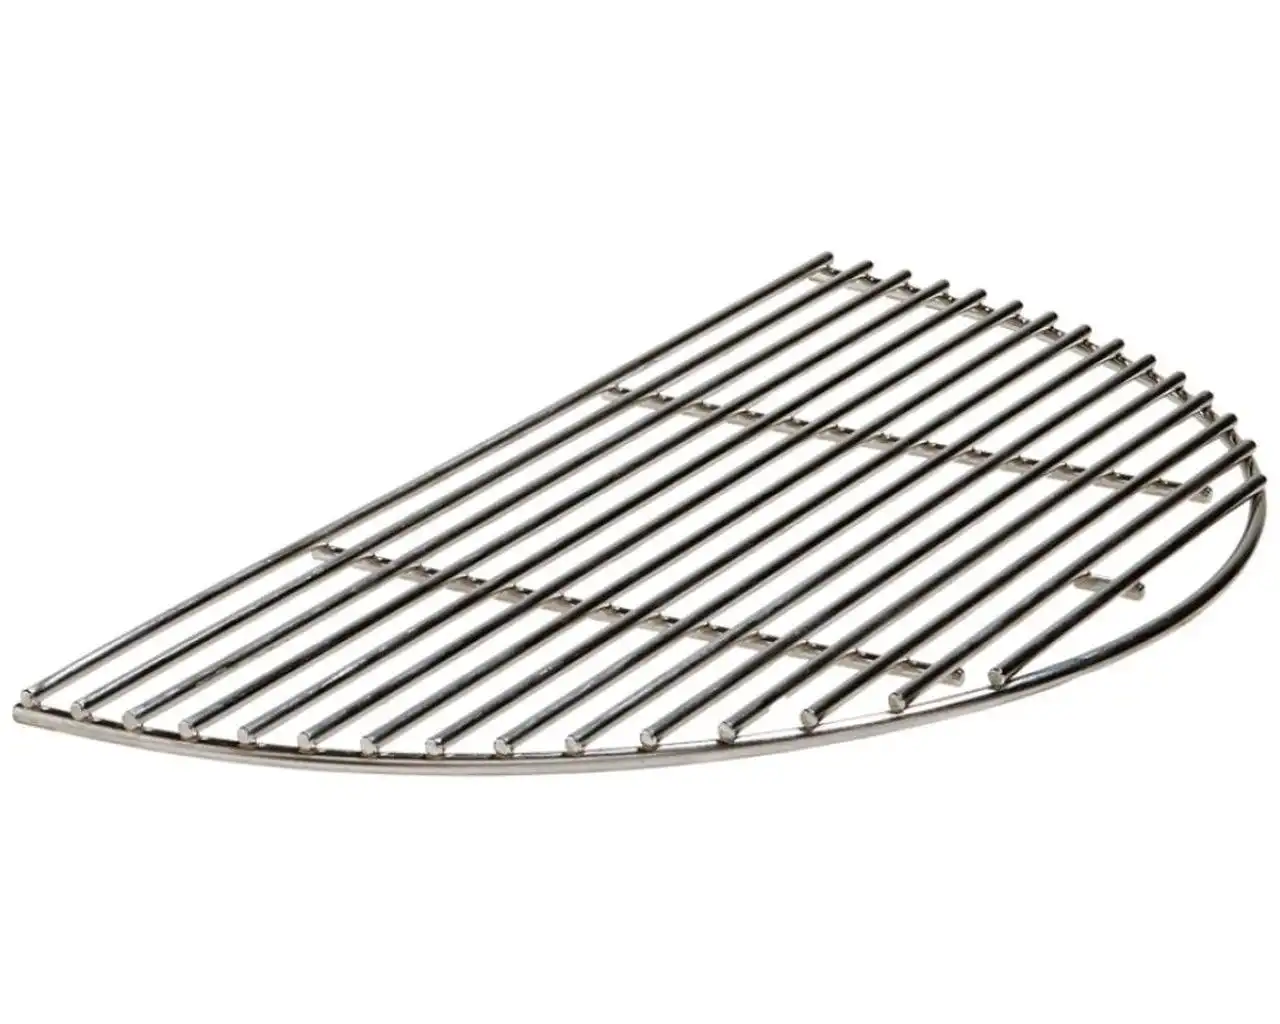 Kamado Classic One Half Moon SS Cooking Grate